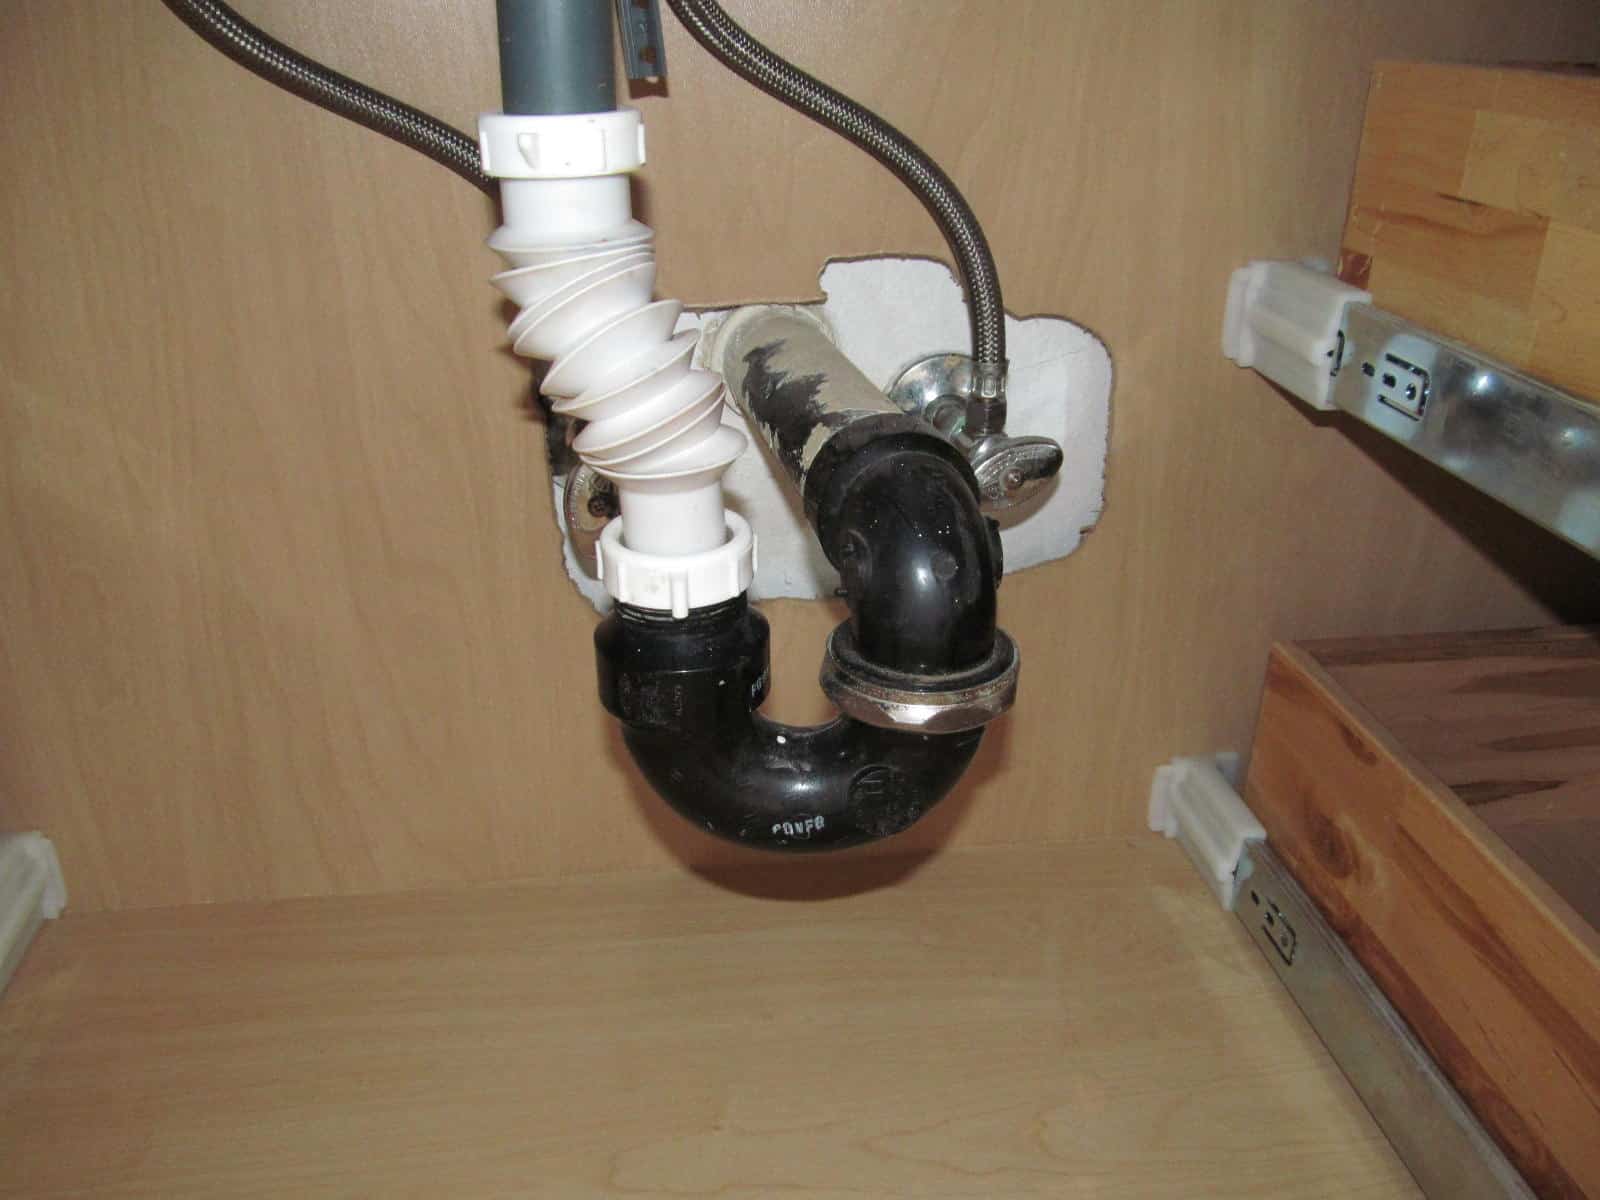 hooking up kitchen sink with flex pipe